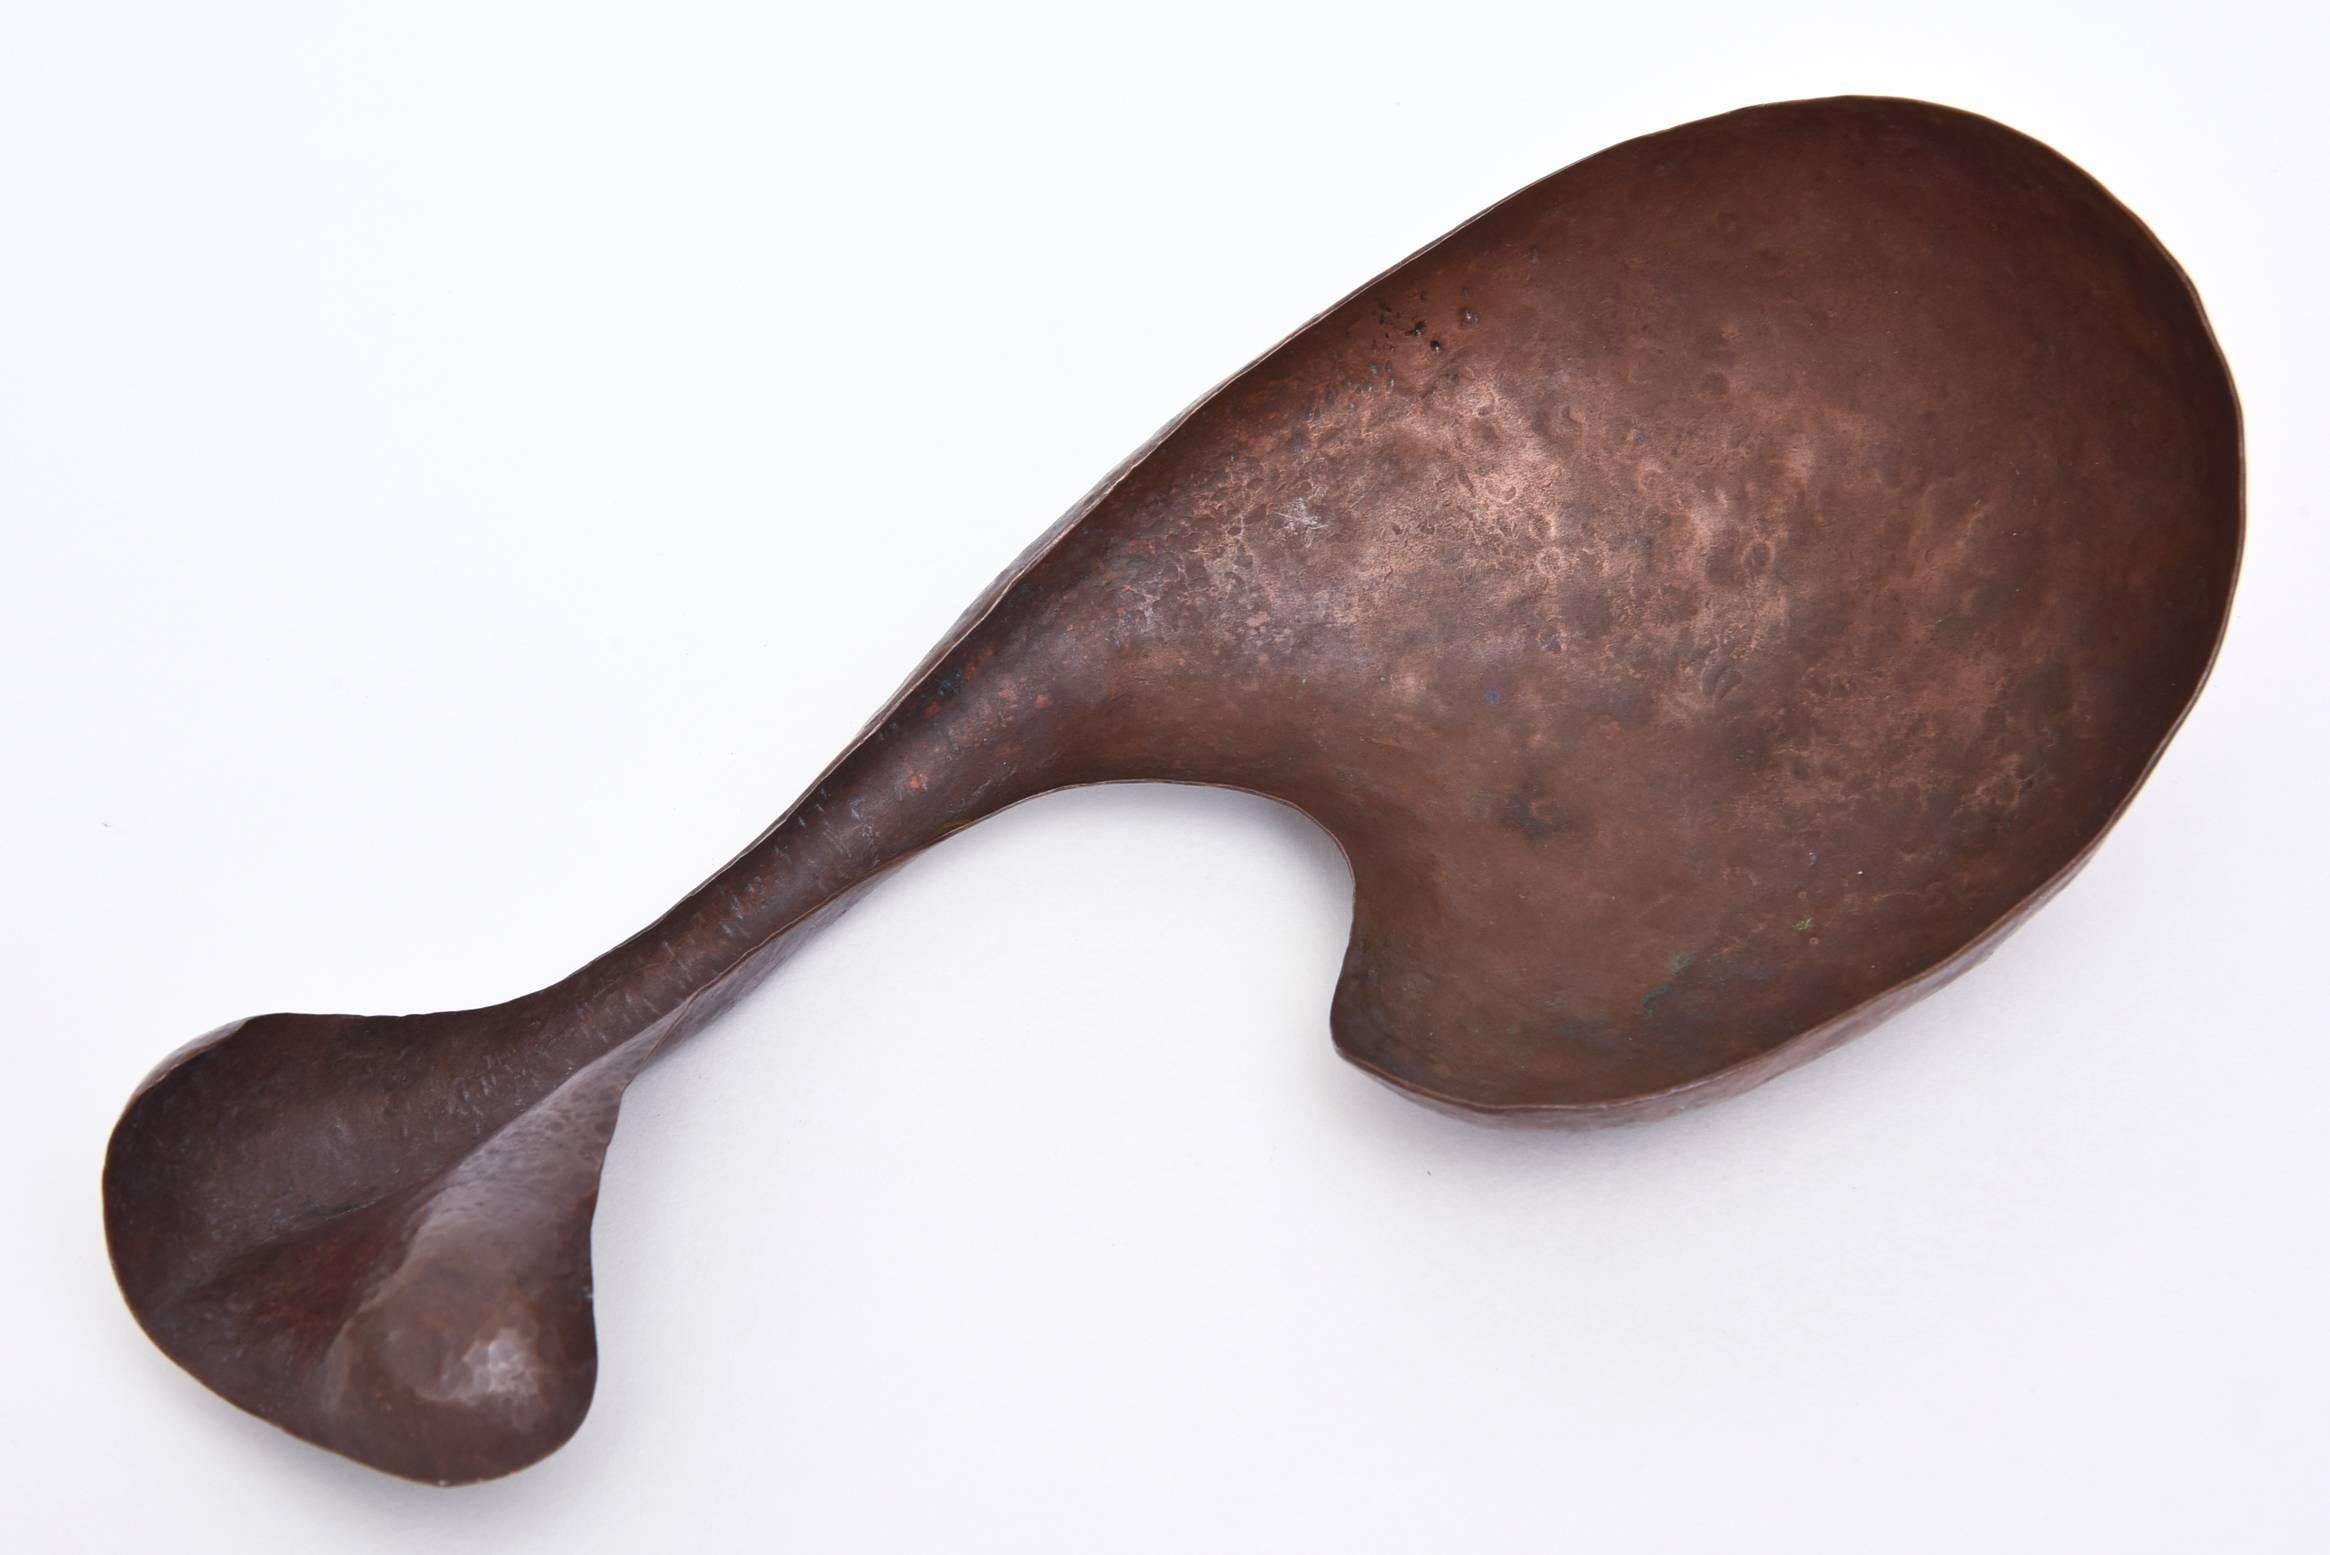 This Mid-century hand-hammered object/sculpture has the form and feel of Jean 
Arp. The patinated copper resonates with a rich under and over tone.
This is very week done and made... and quite vintage. It is organic modern meets bio-morphic form